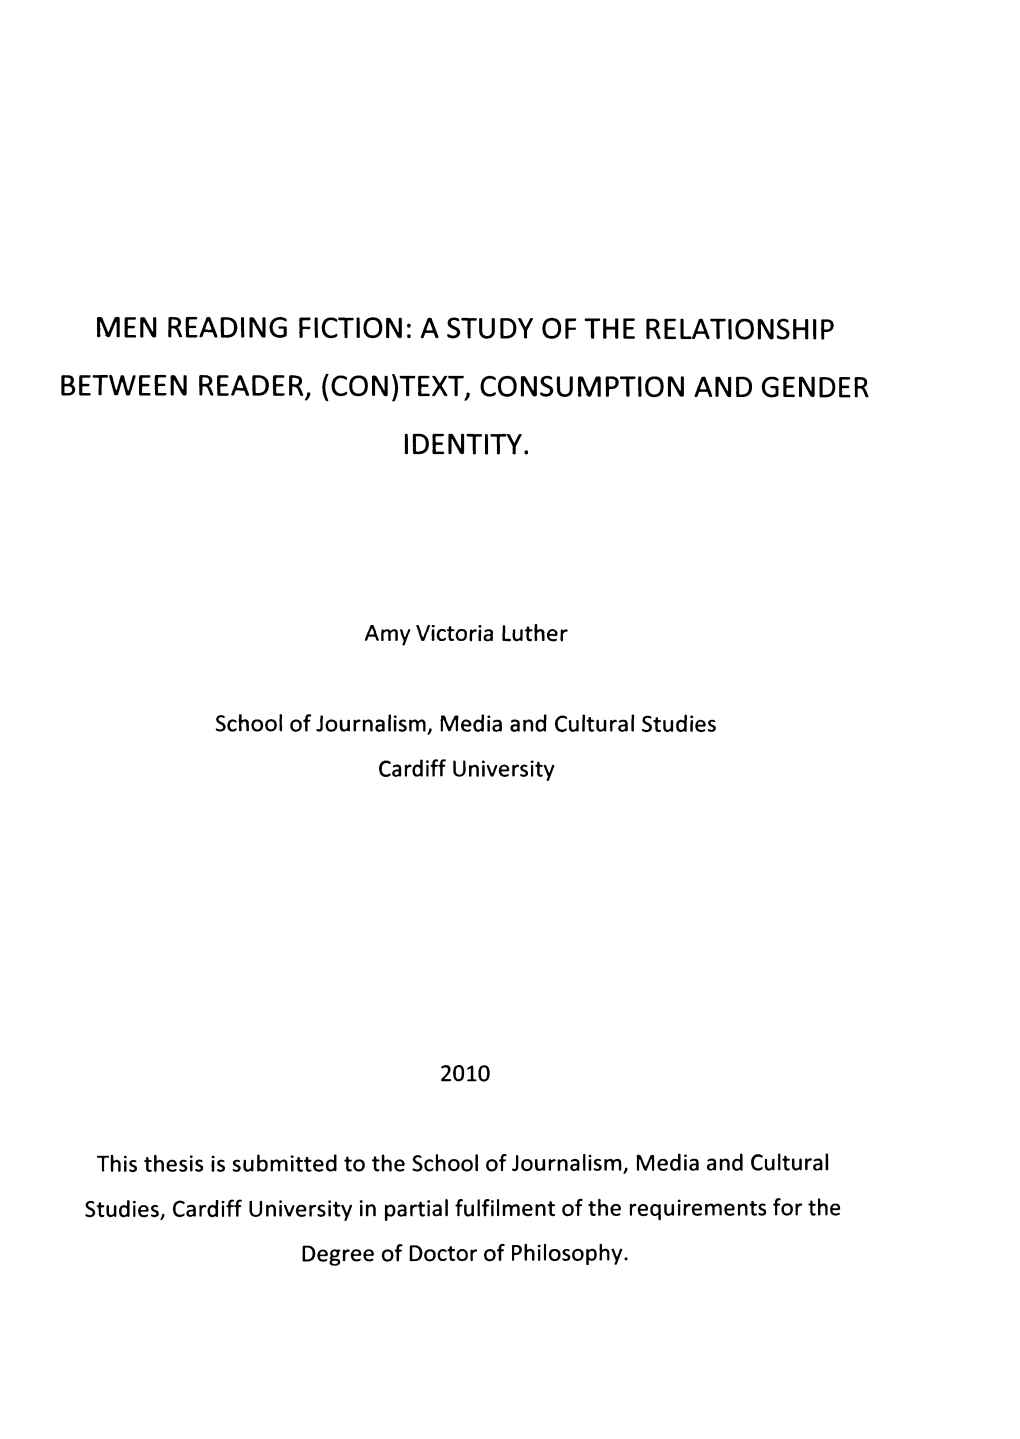 Men Reading Fiction: a Study of the Relationship